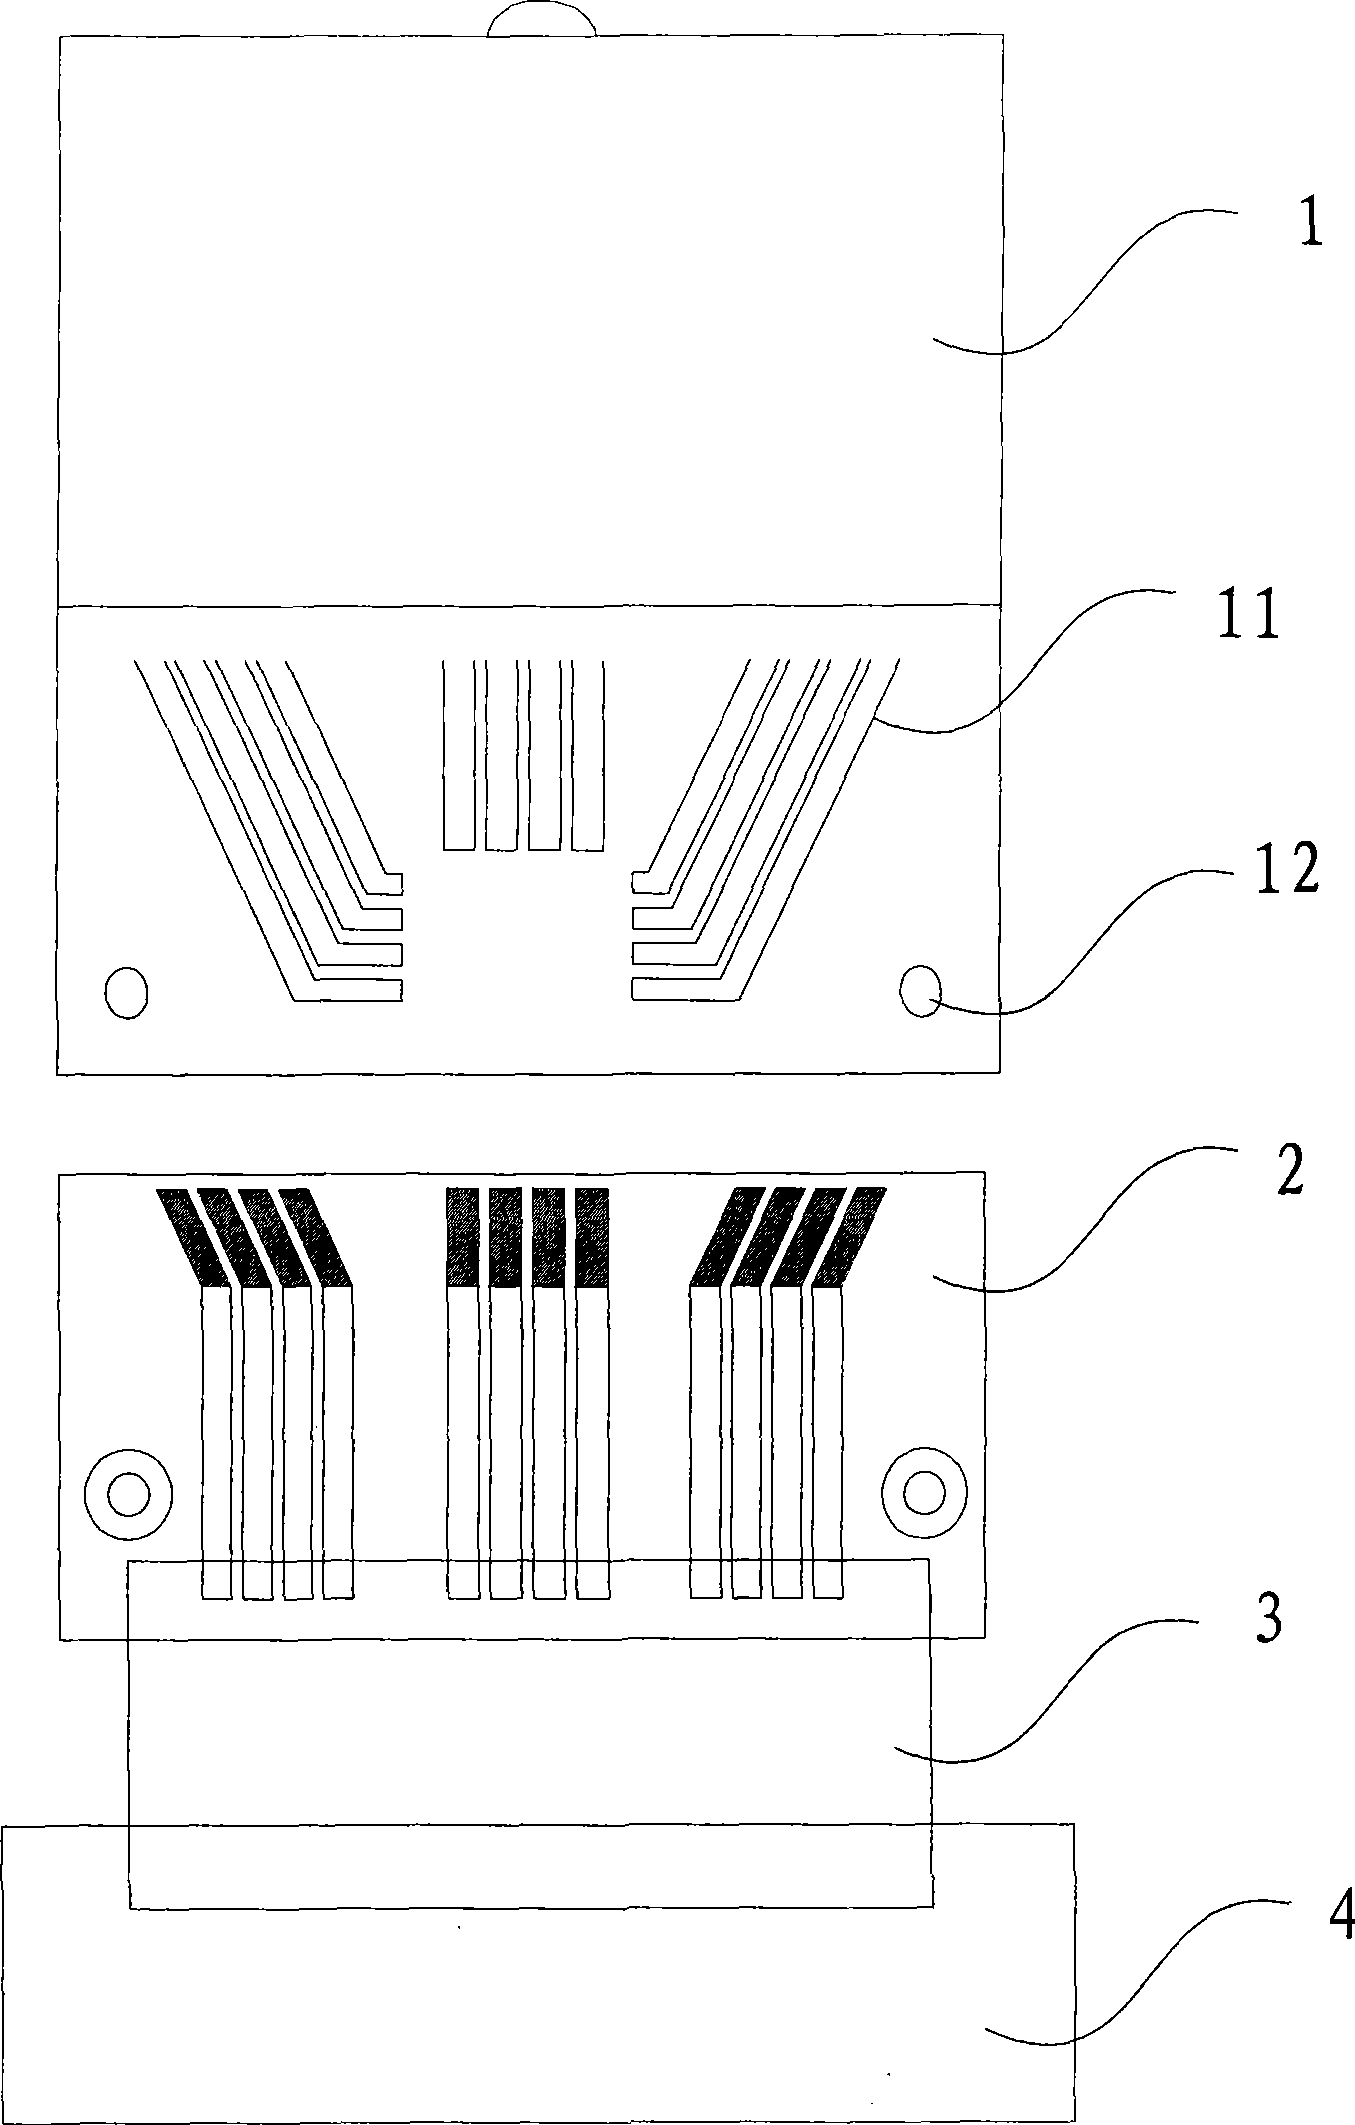 LCD testing and connecting device and method for making same